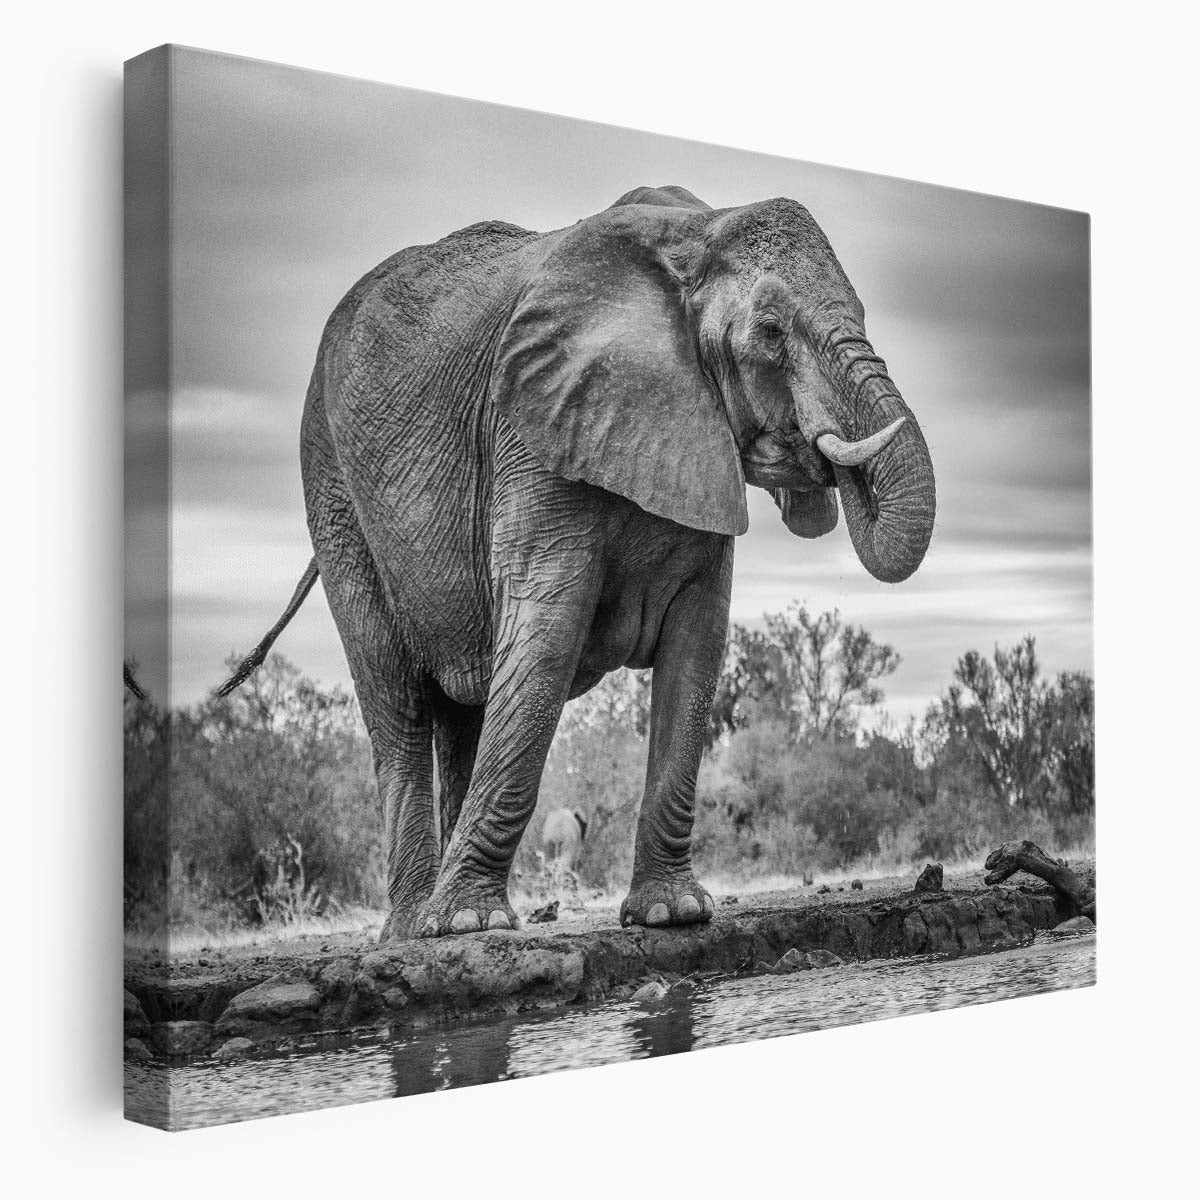 Majestic African Elephant Safari Monochrome Wall Art by Luxuriance Designs. Made in USA.